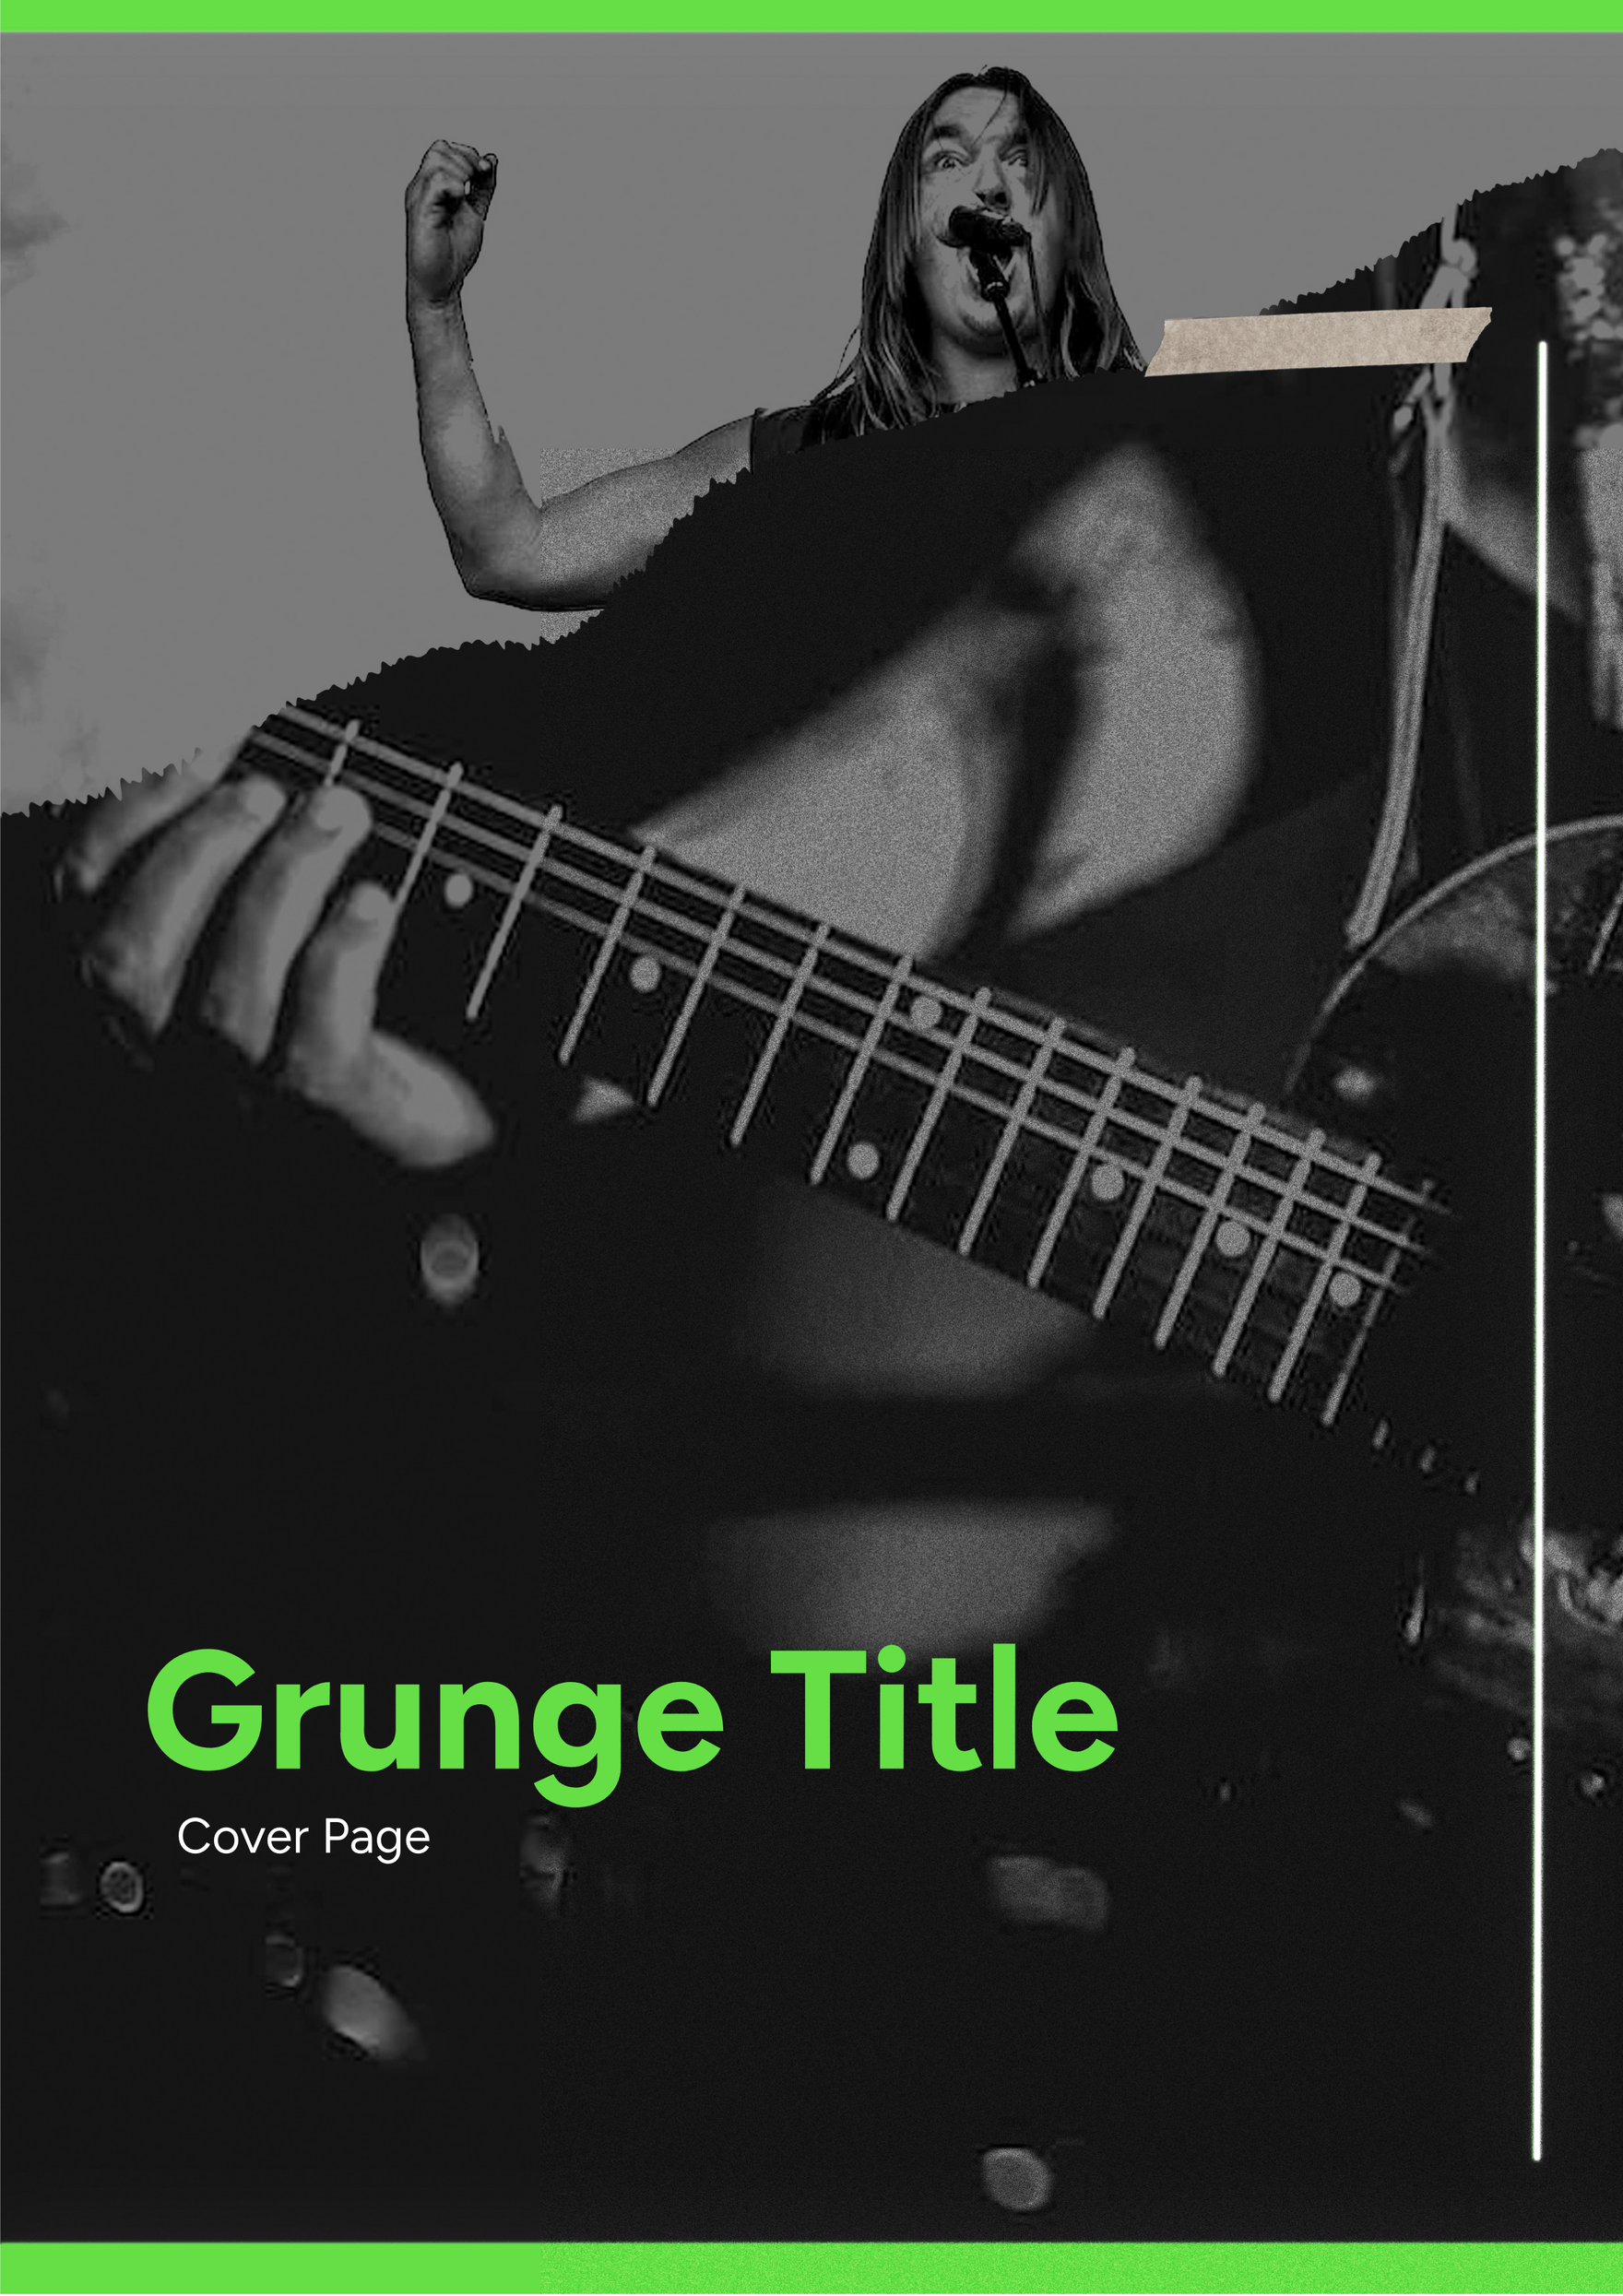 Grunge Title Cover Page